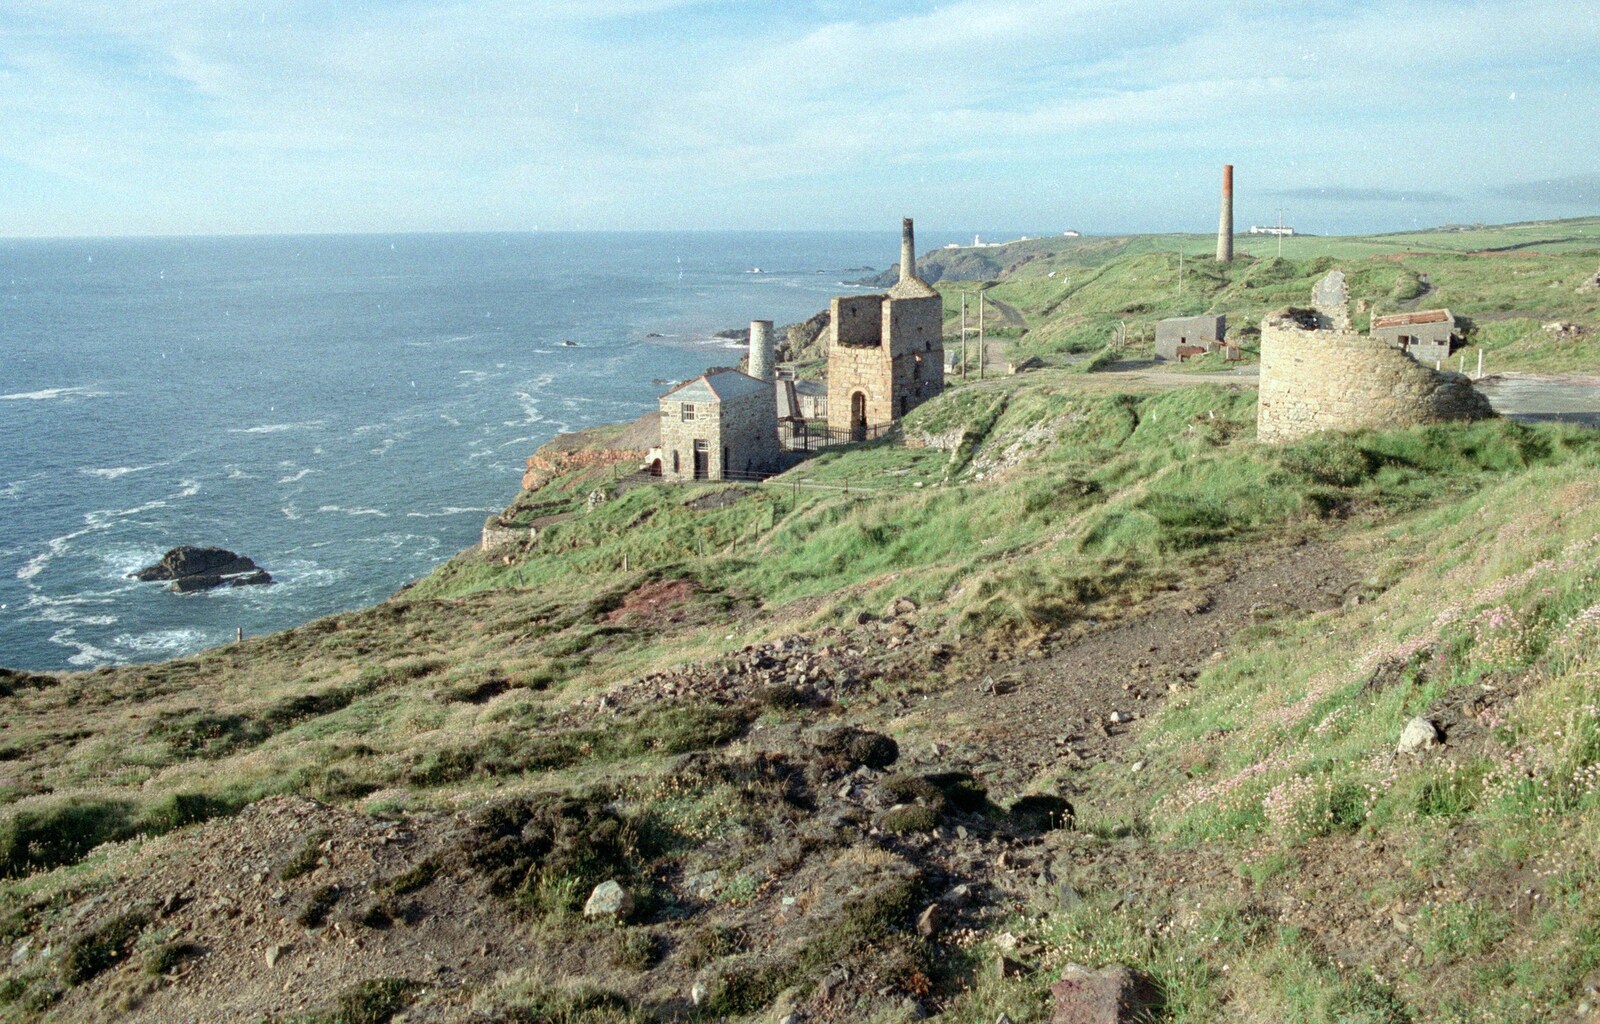 Possibly the Wheal Jane tin mine from Uni: An End-of-it-all Trip to Land's End, Cornwall - 13th June 1989